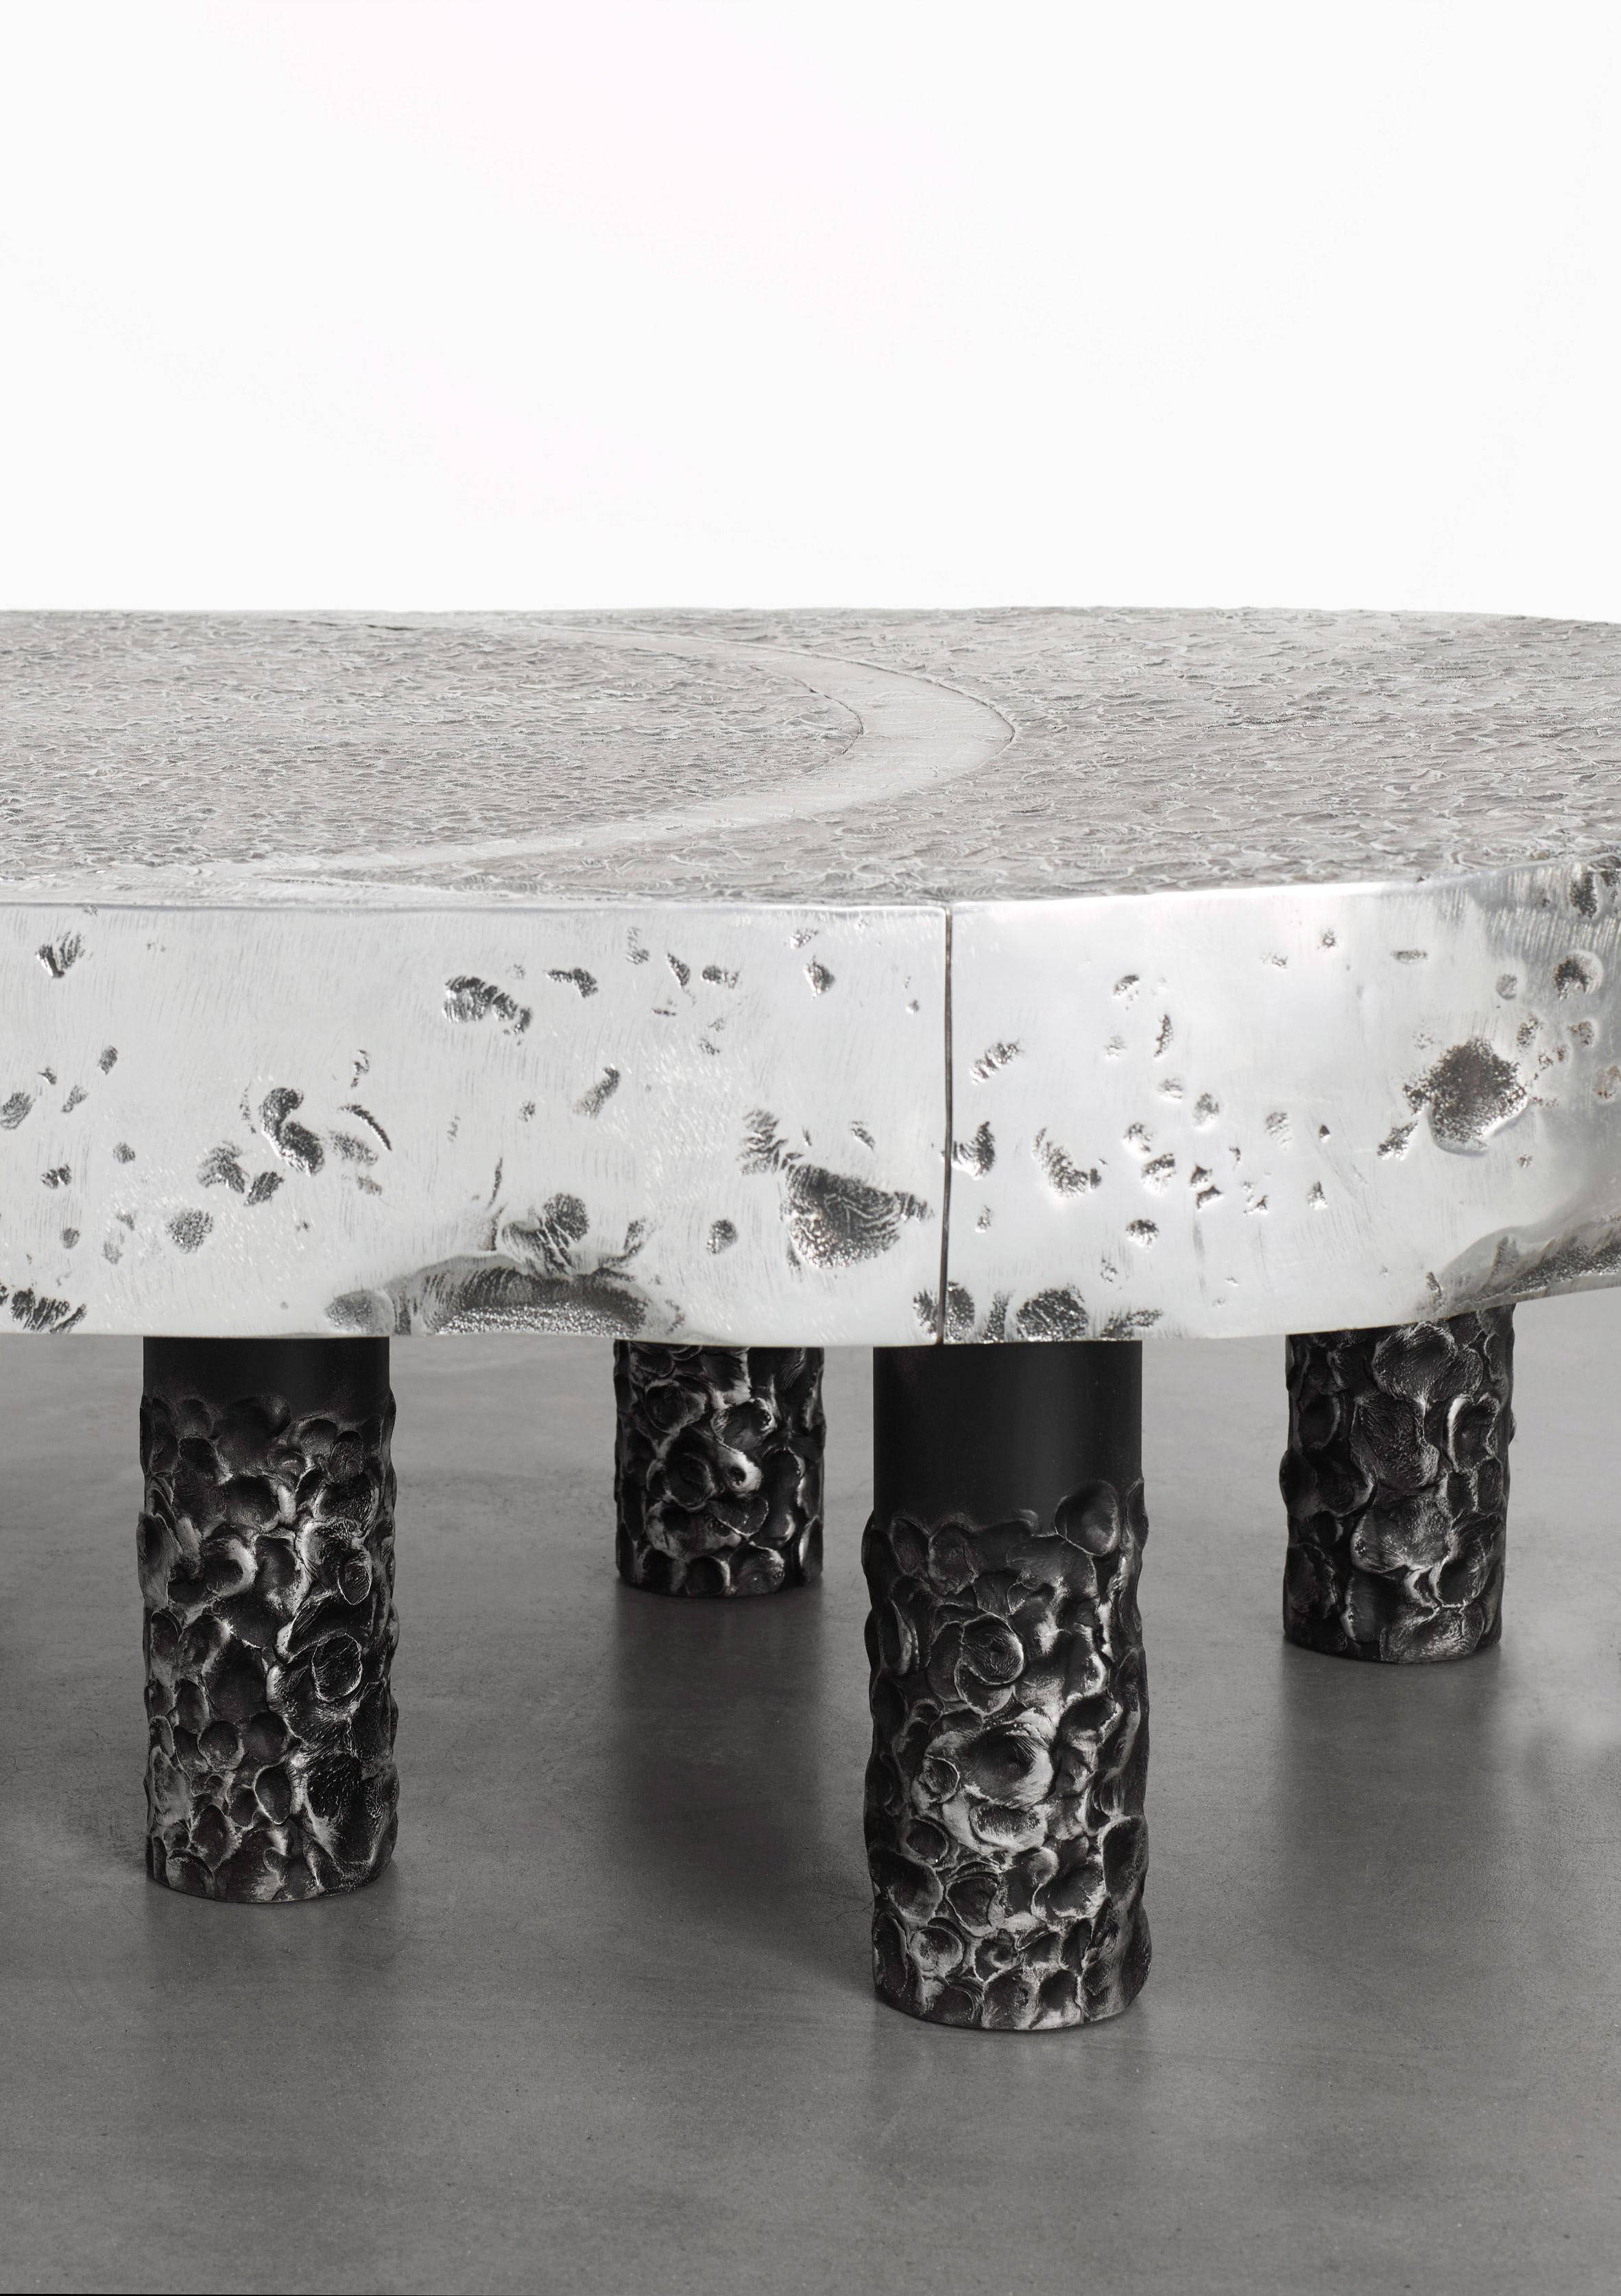 Vincent Dubourg's Vortex aluminium furniture goes on show in New York-19